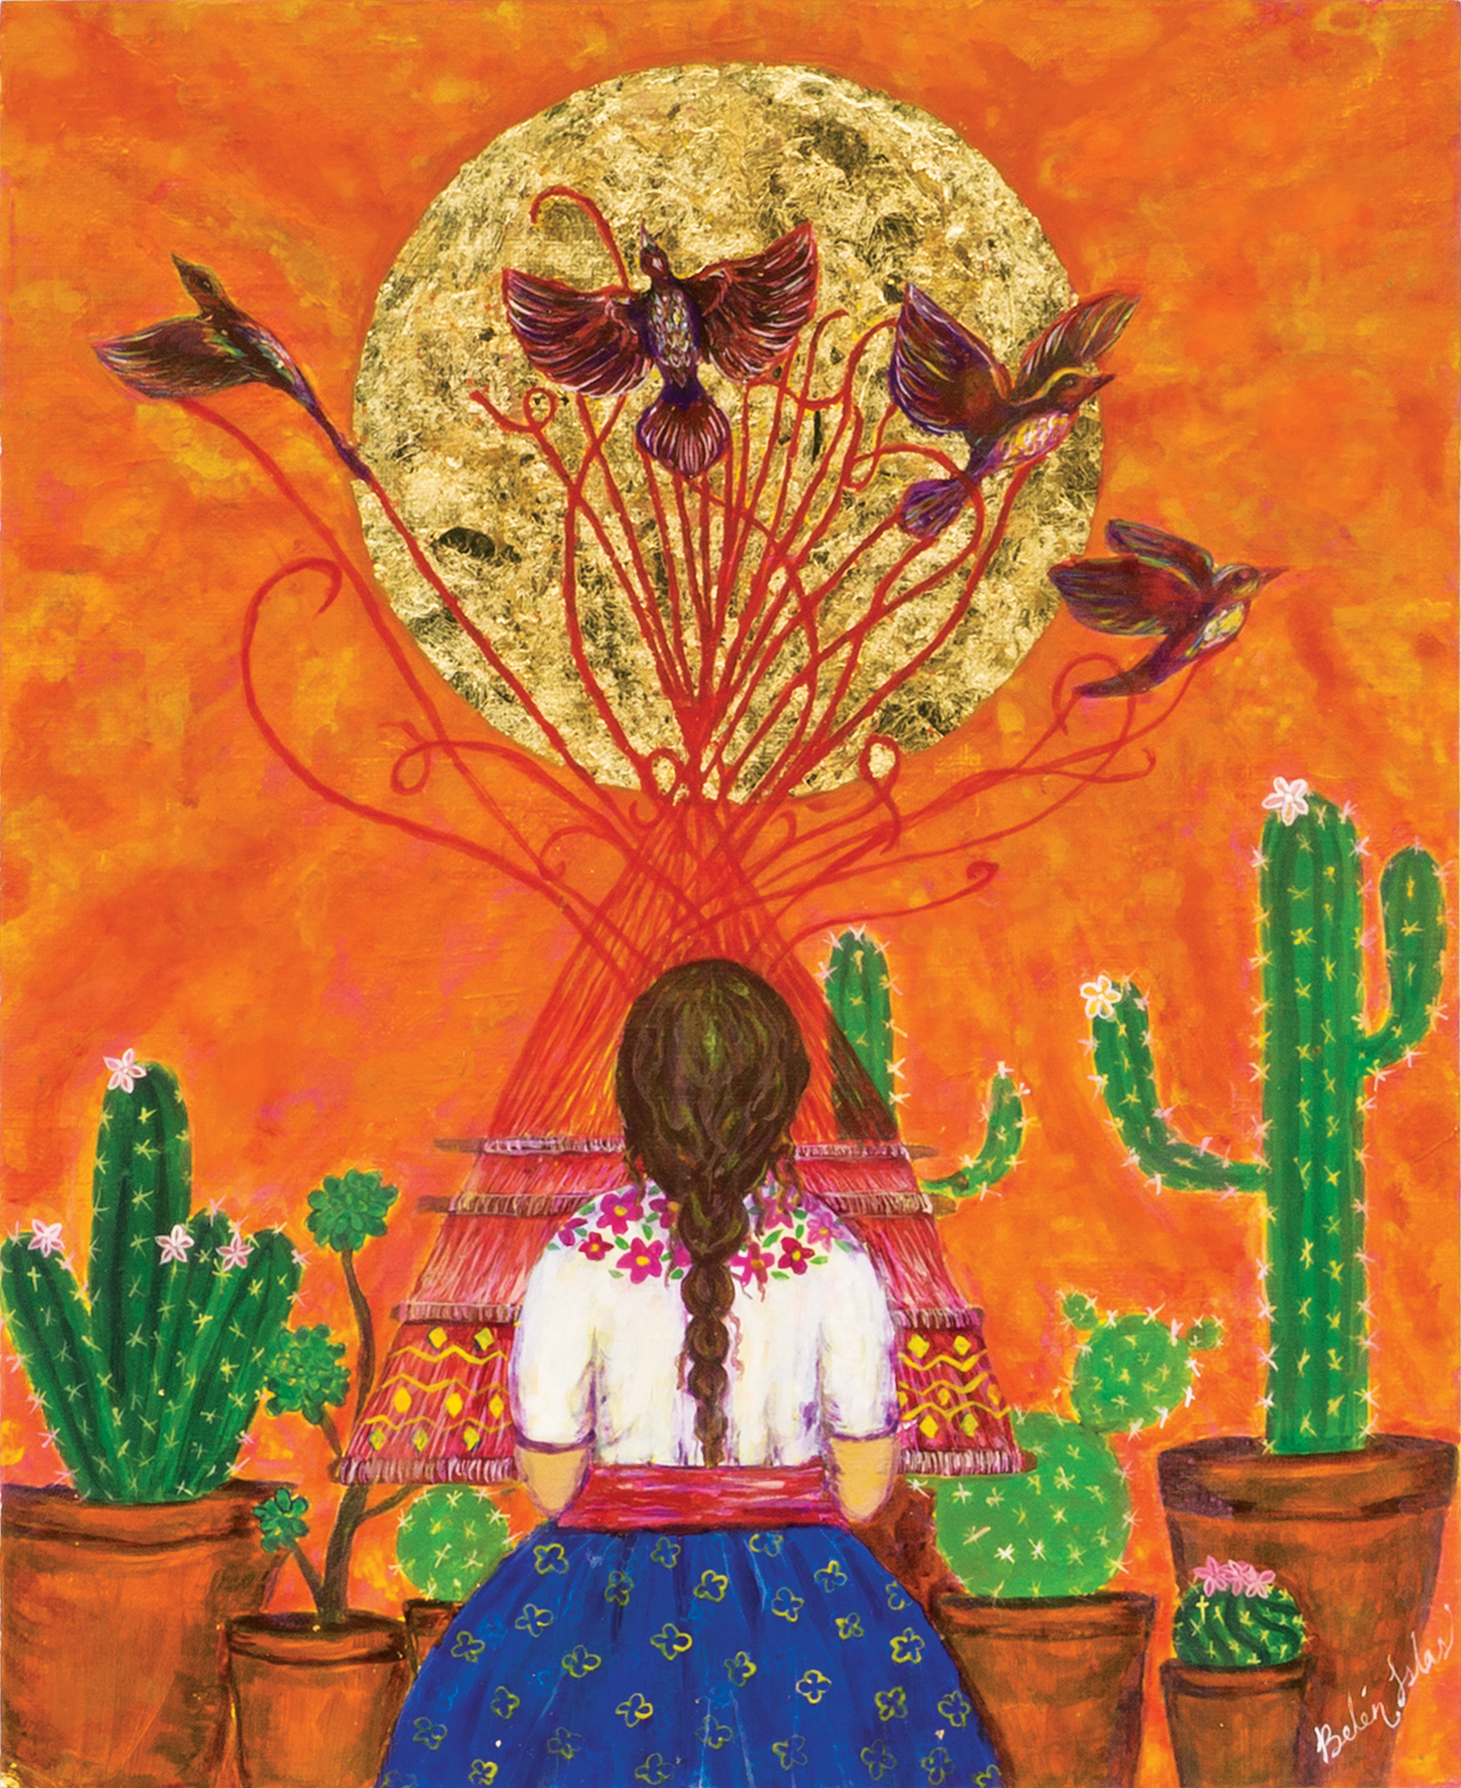   The Weaver   Acrylic painting on Panel / Board / MDF  by  Belen Islas   Size: 9 x 11"    $750.00   